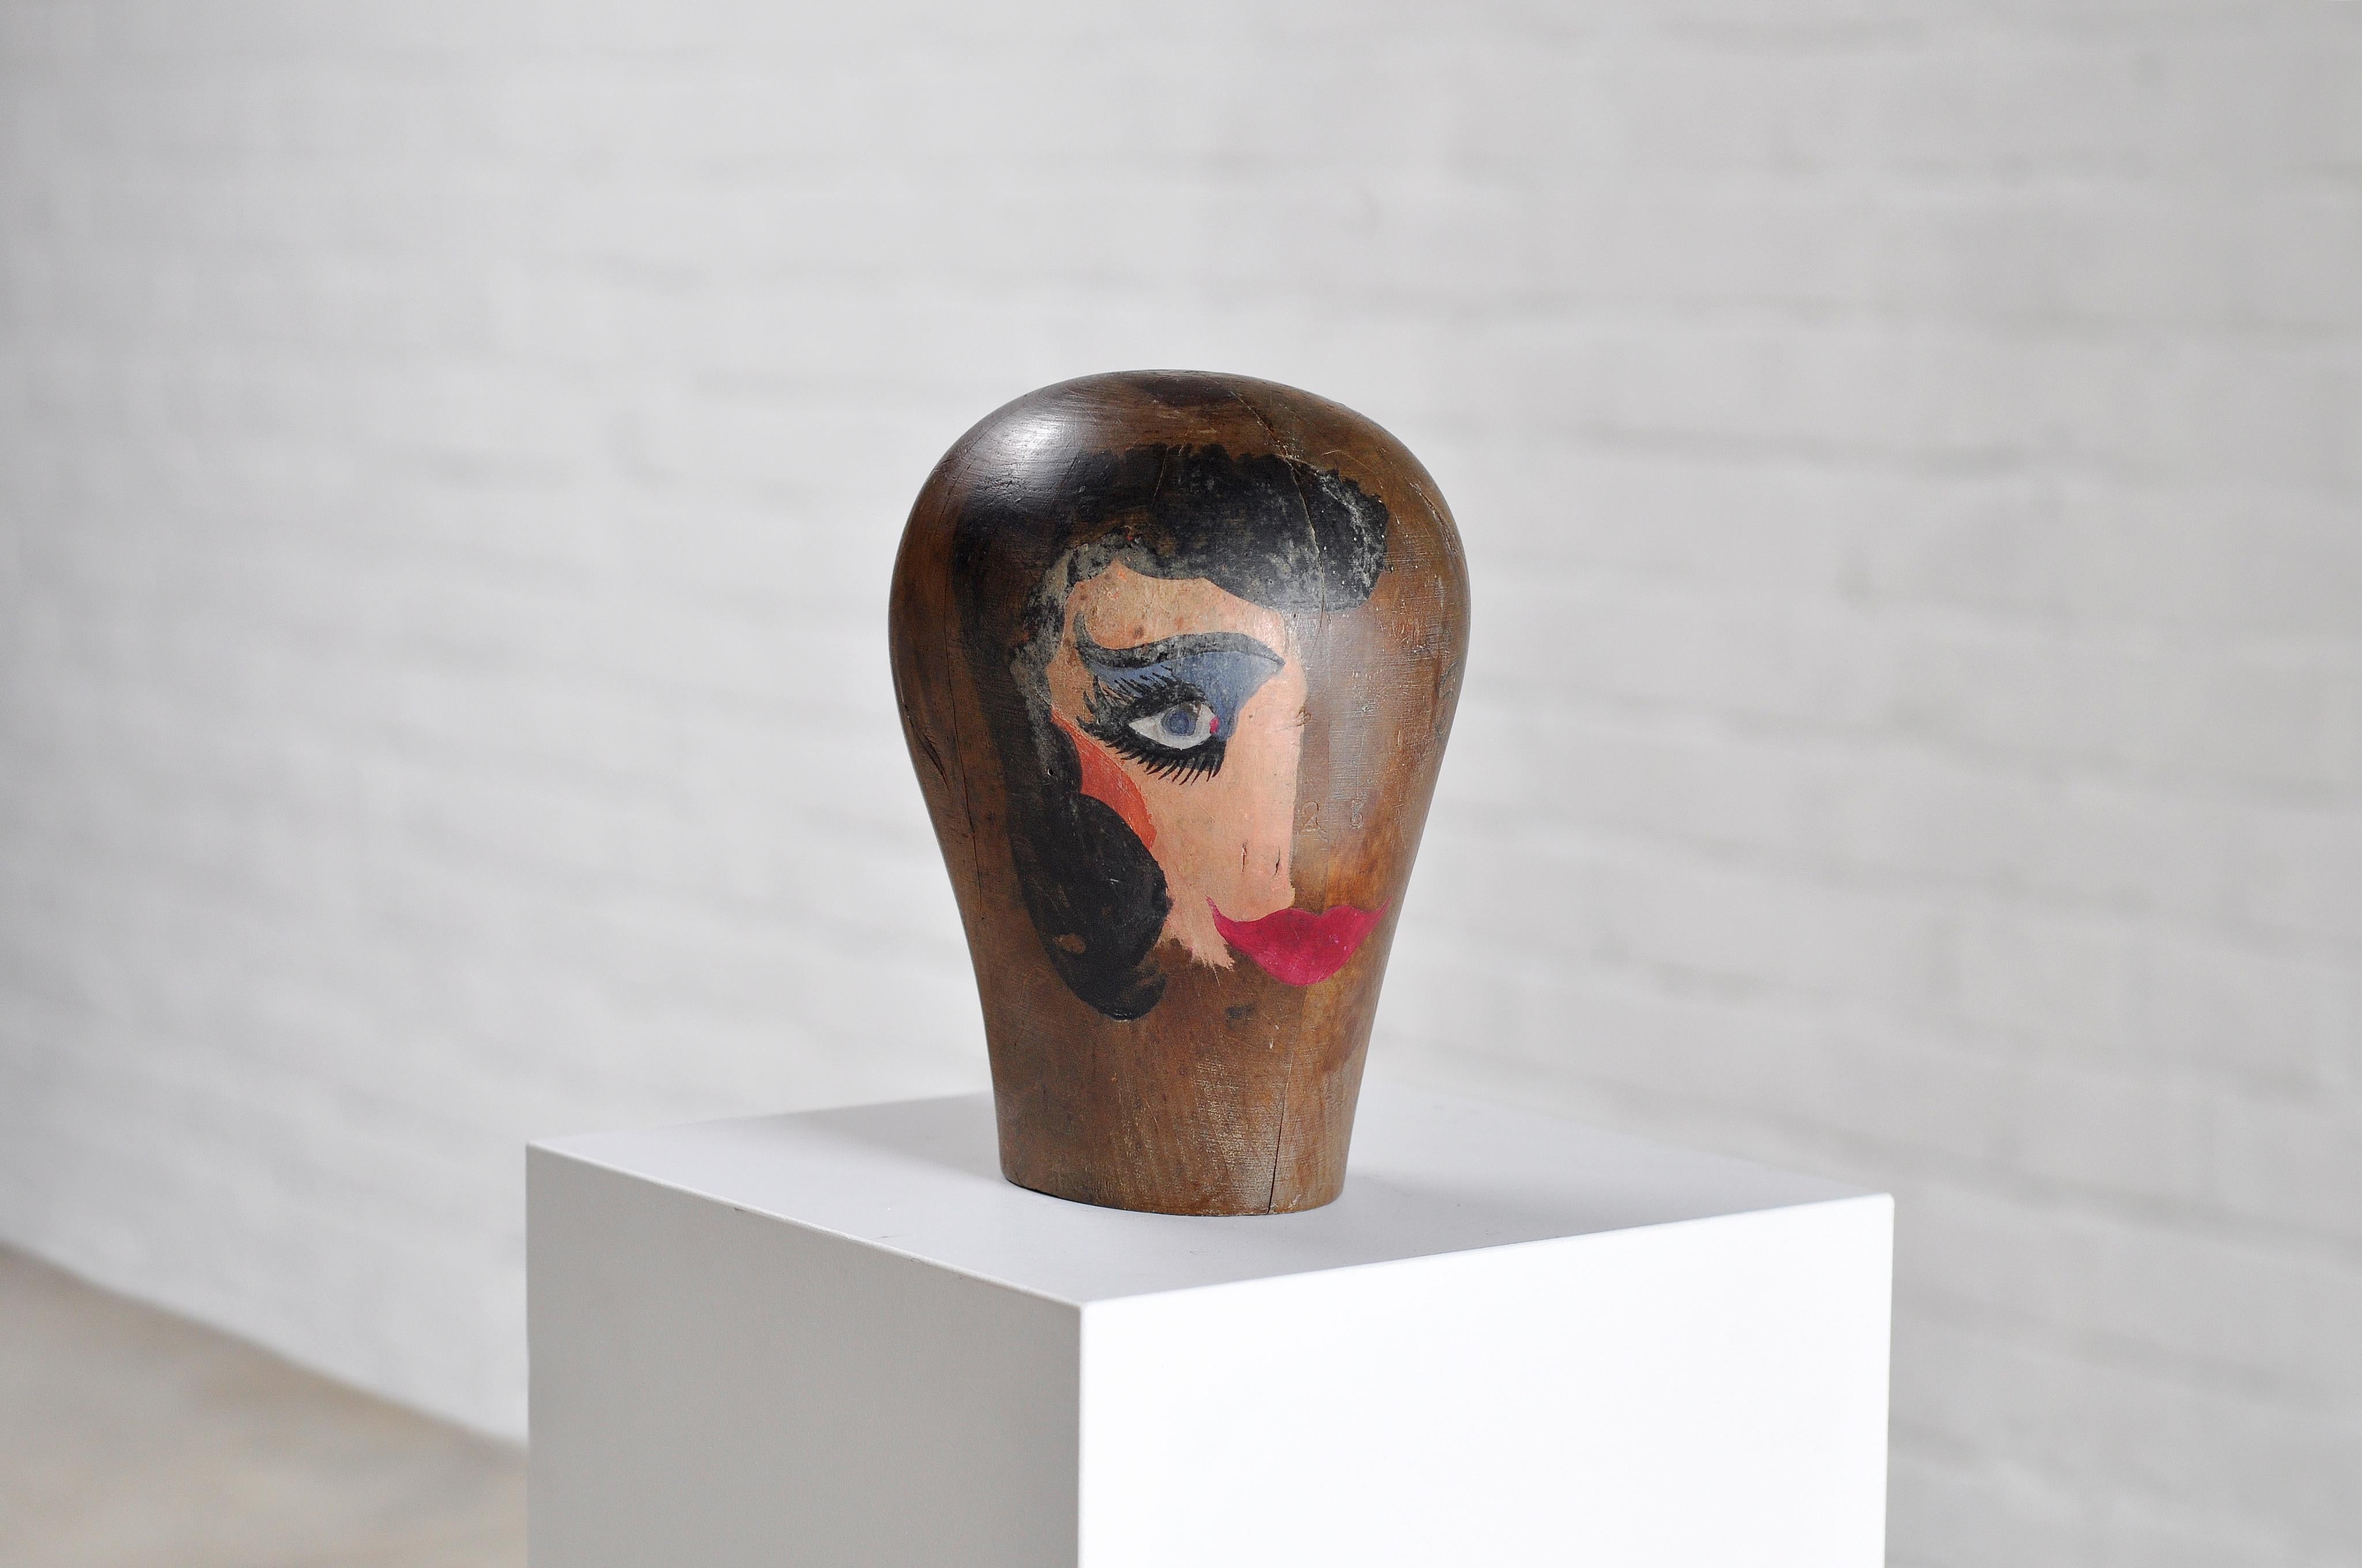 A unique surrealist/abstract bauhaus wooden head sculpture, hand painted circa 1920's. The artist is not known but there is a illegible/unknown stamp on the back bottom. Amazing and very decorative piece of 20th century art. Made out of full wood so